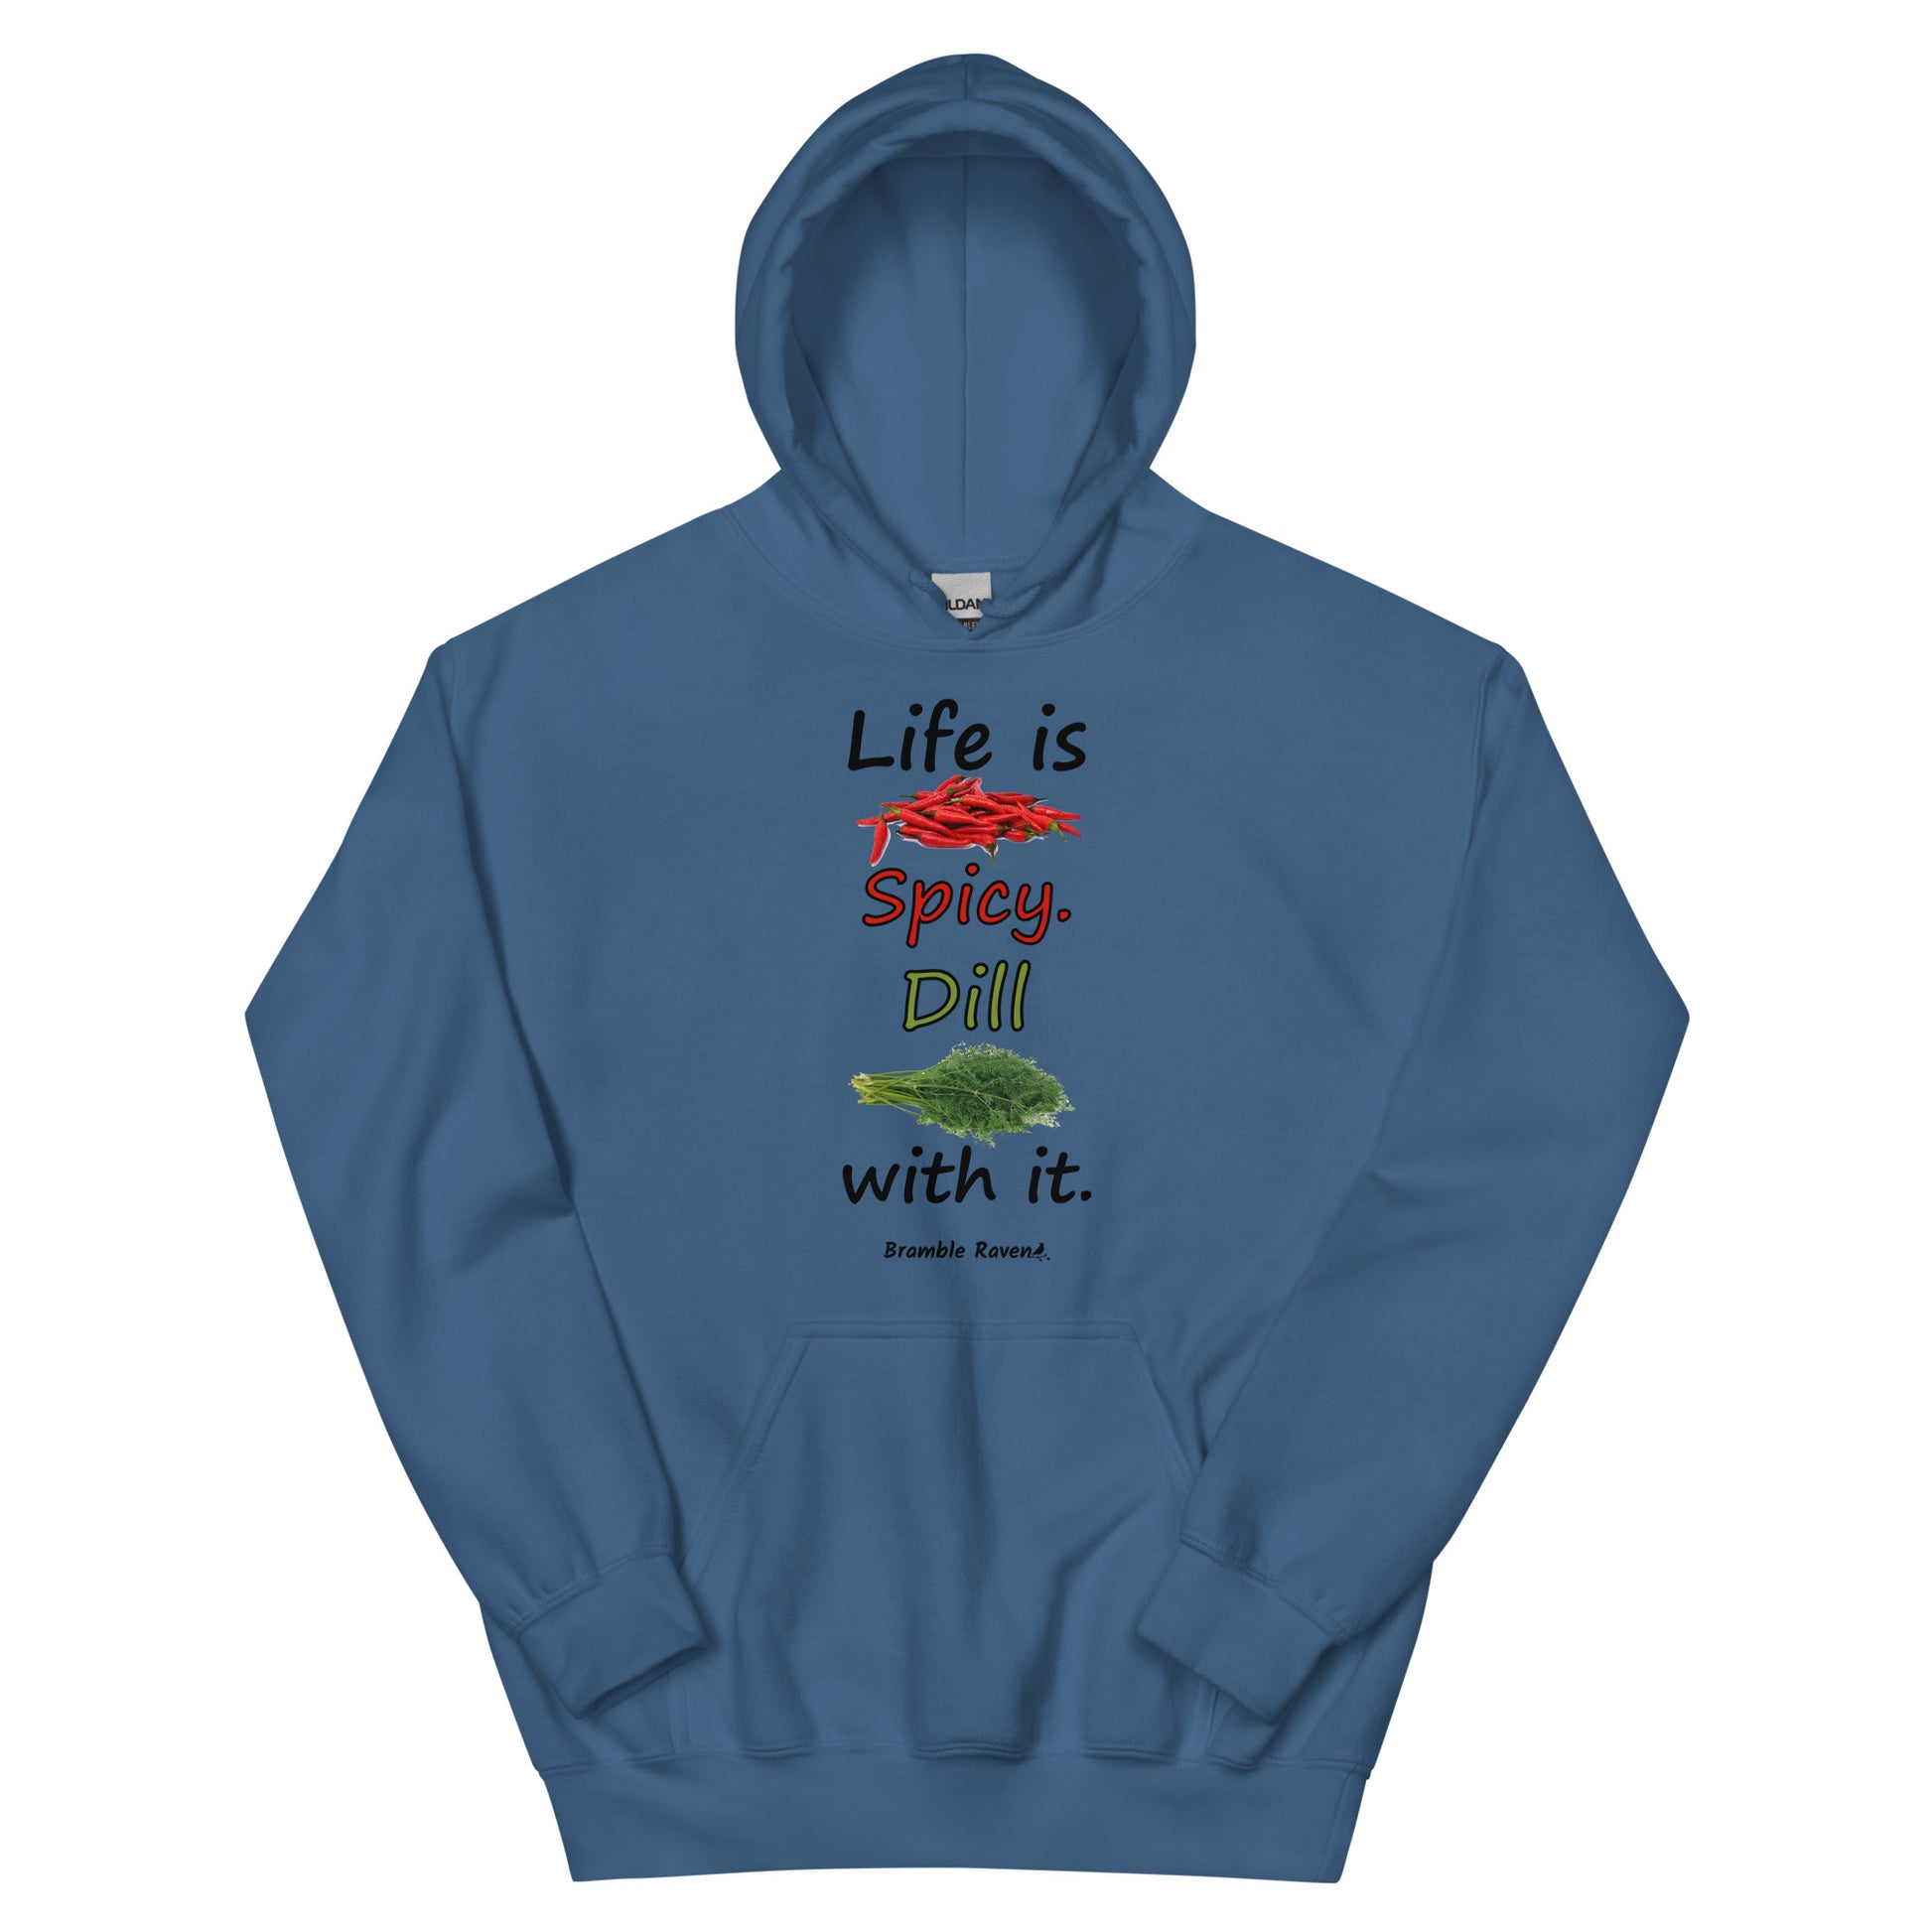 Indigo blue colored unisex heavy blend hoodie.  Double lined hood, matching drawcord, front pouch pocket. Rib knit cuffs and waistband. Features text and image: Life is spicy. Dill with it. 